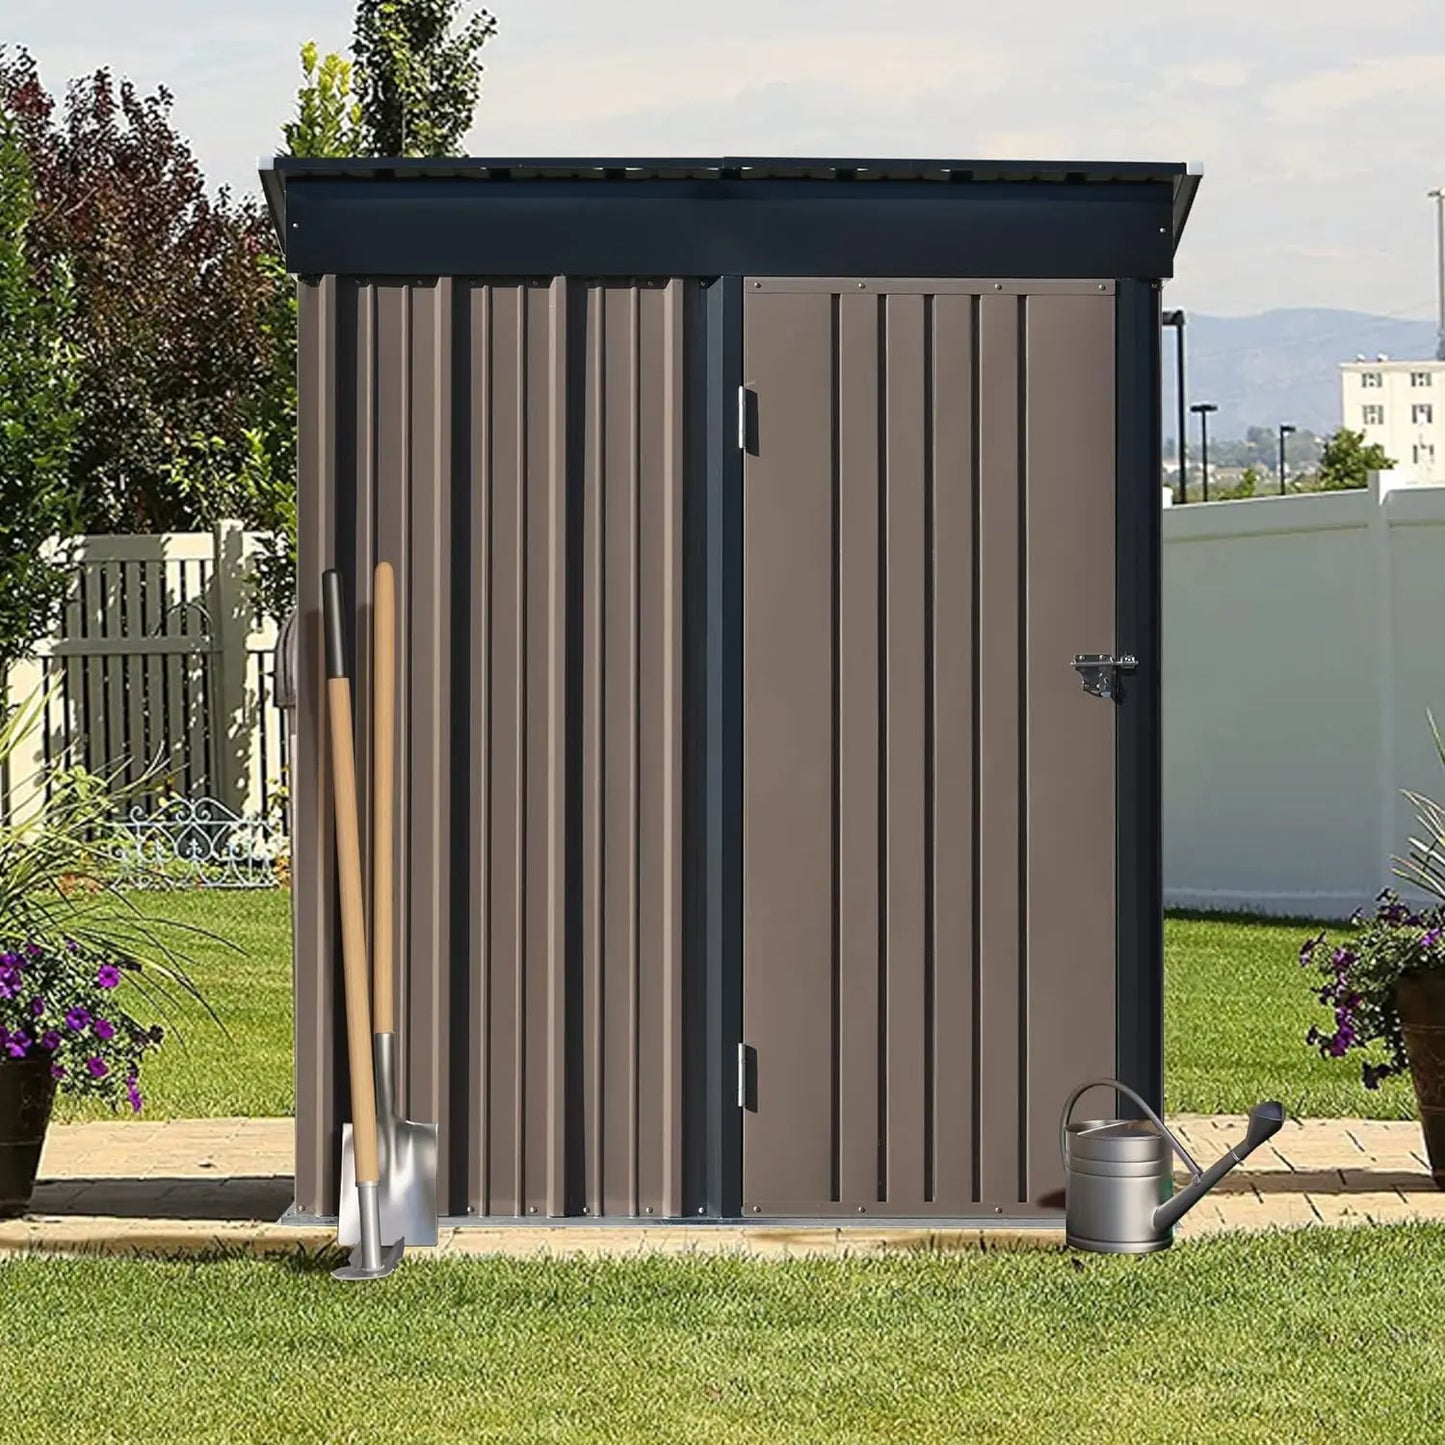 Outdoor Storage Shed with Lockable Doors for Backyard Lawn Garden 10ftx8ft Metal Outdoor Galvanized Steel Storage Shed